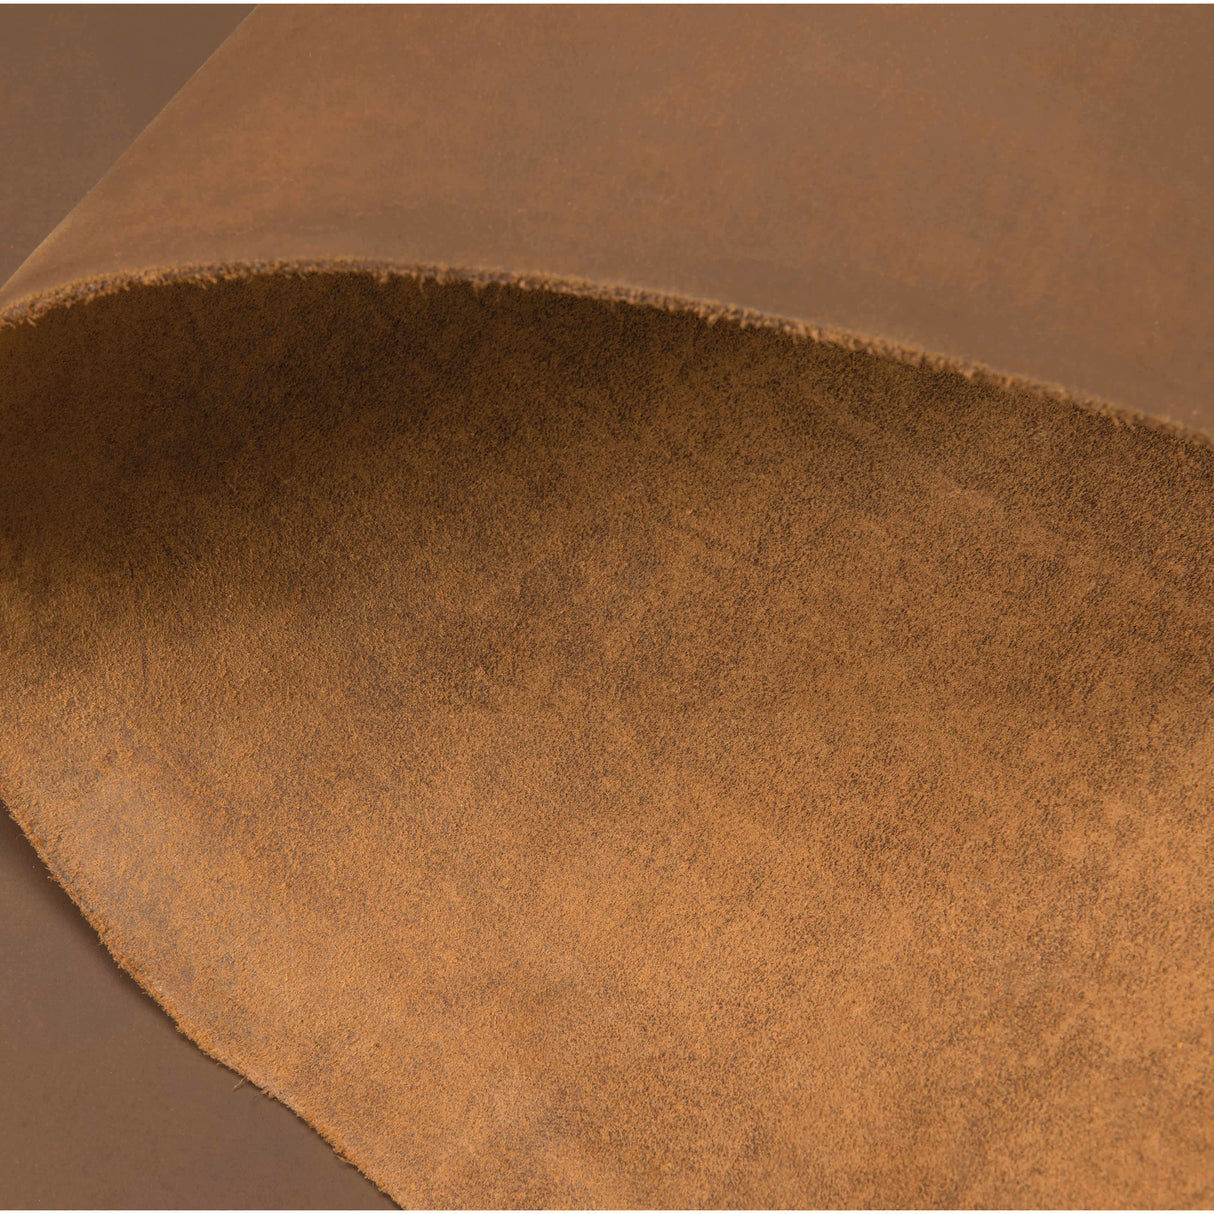 Matte Chrome Tanned Water Buffalo Leather, 5-6 oz., Bark Brown